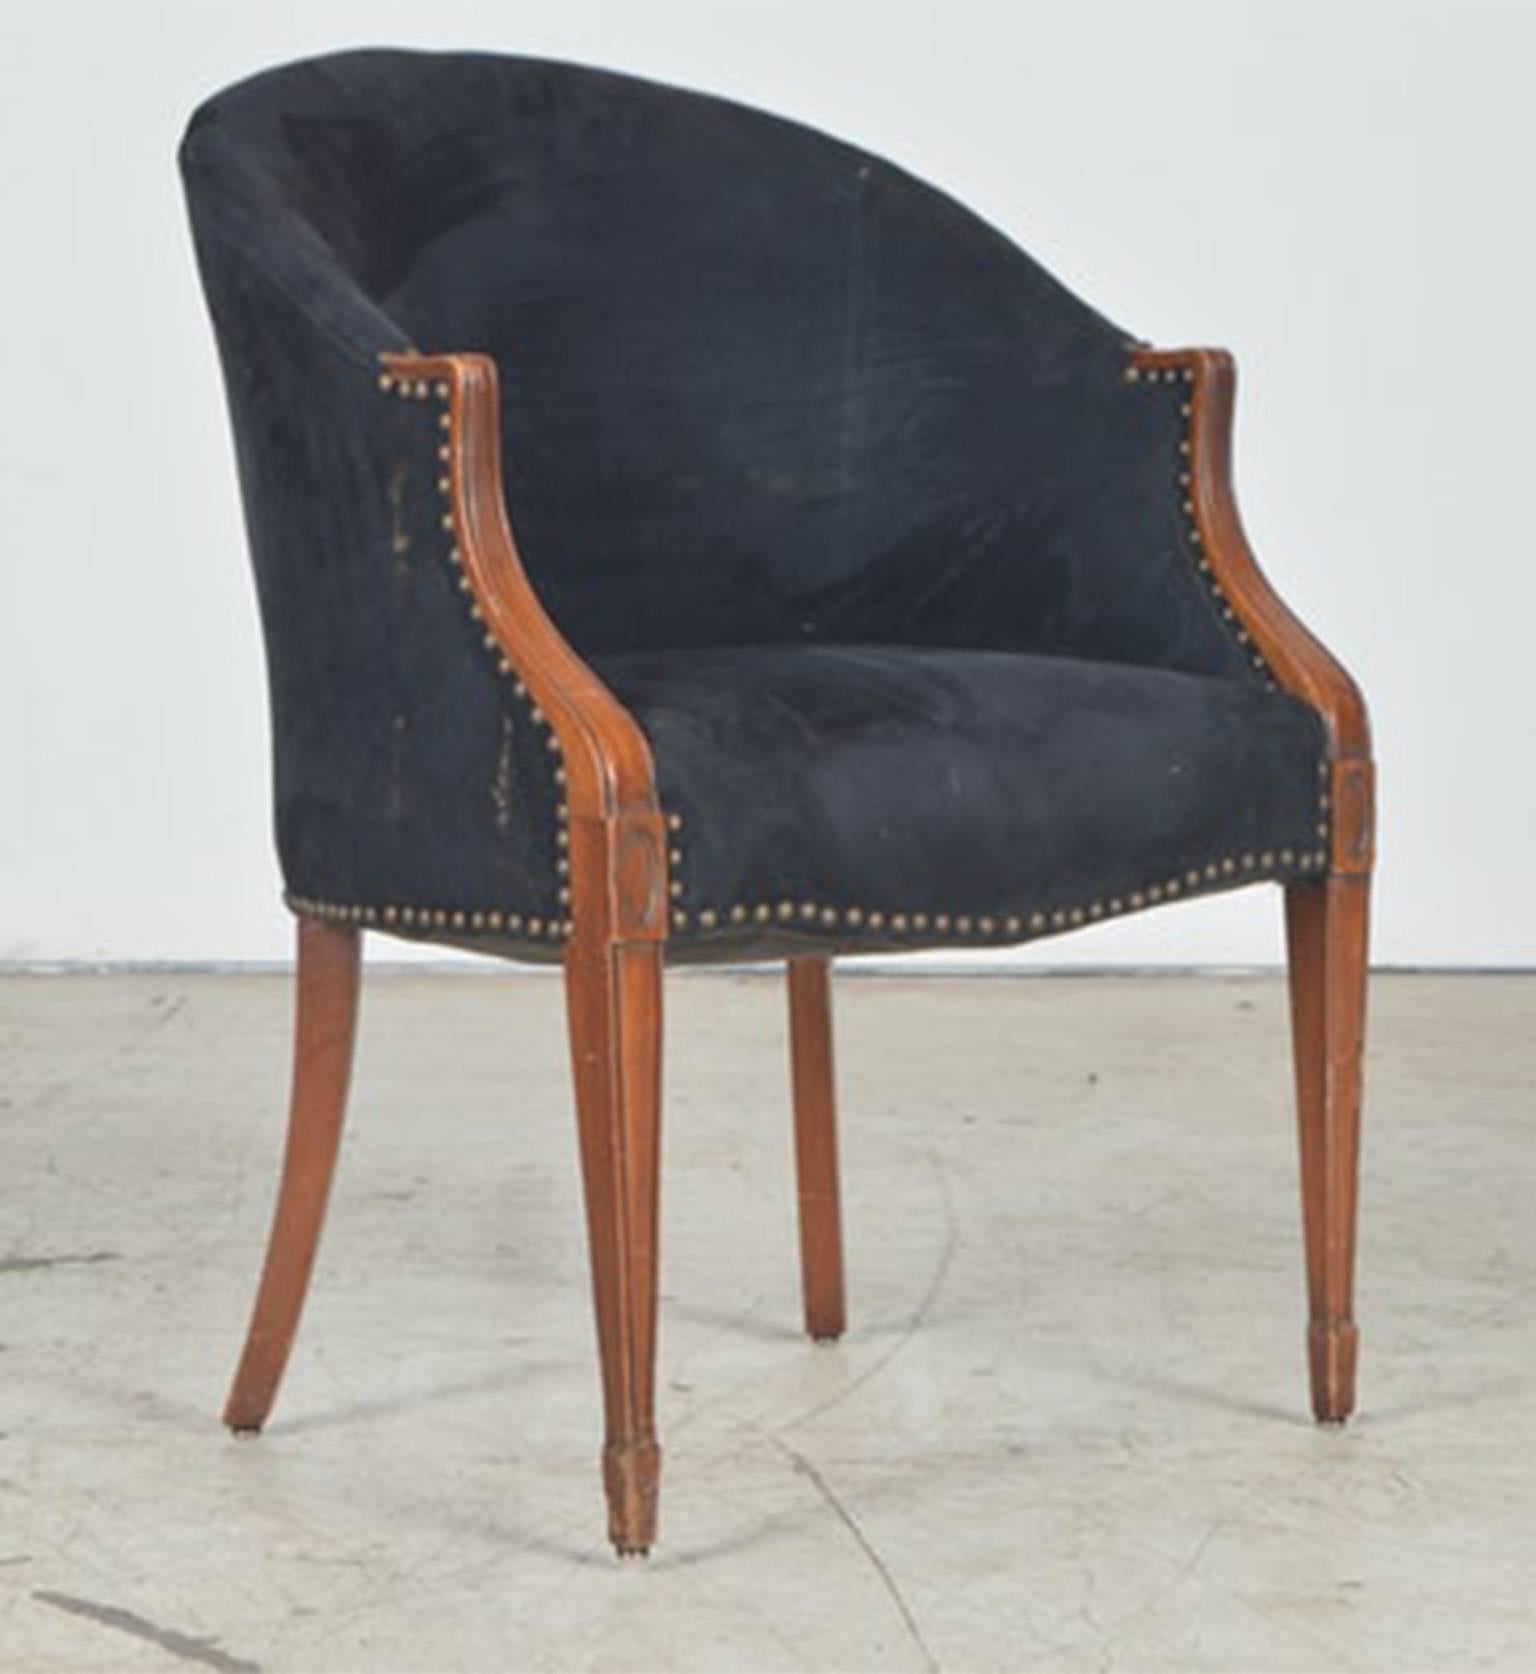 A set of 4 vintage barrel back chairs. Neoclassical in form the chairs have a high rounded back and piece arms. The back and the sides of the chairs are covered in black velveteen fabric with exposed brass nailheads along the arms and seat of the